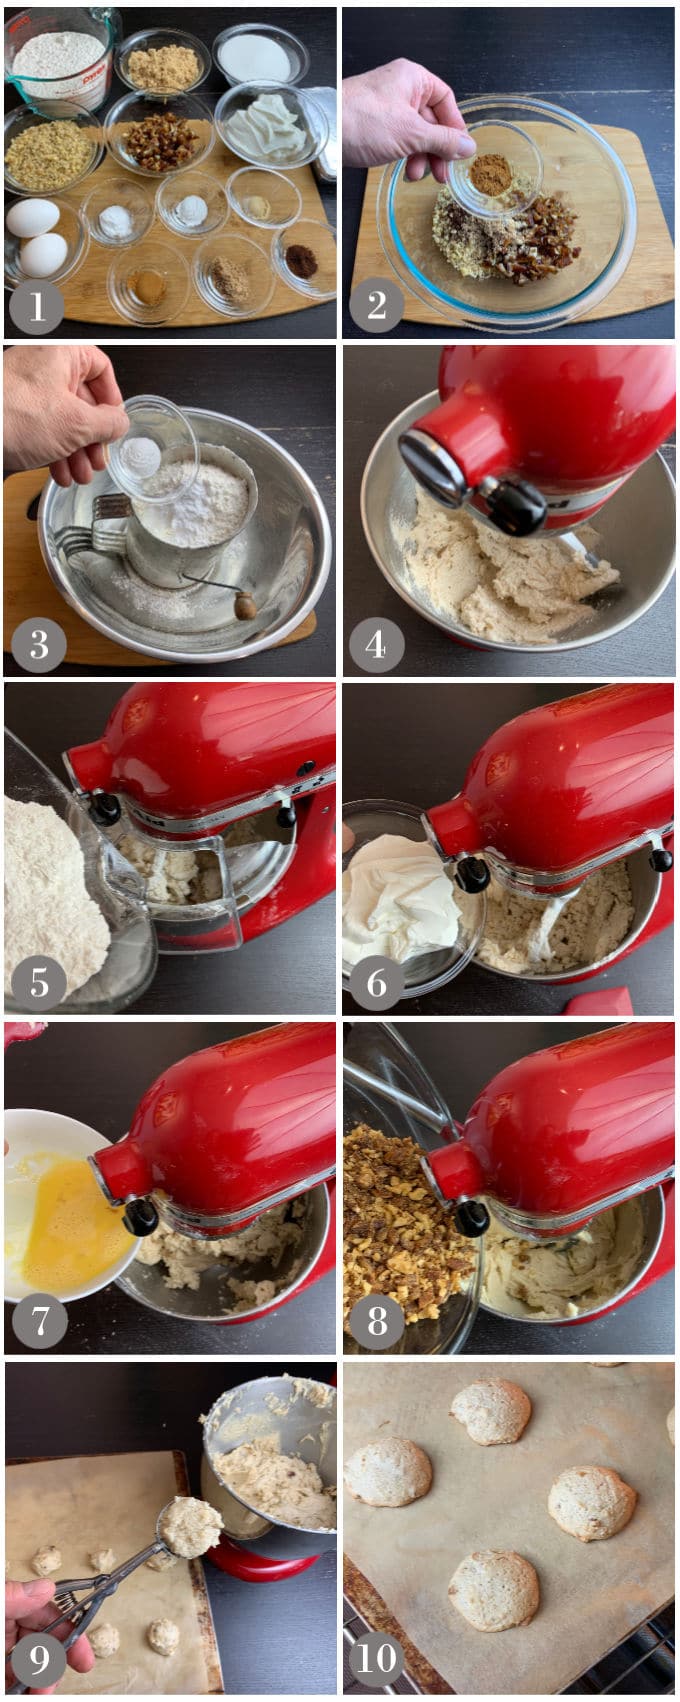 A collage of photos showing the ingredients and step to make hermit cookies with a stand mixer then baked in the oven.